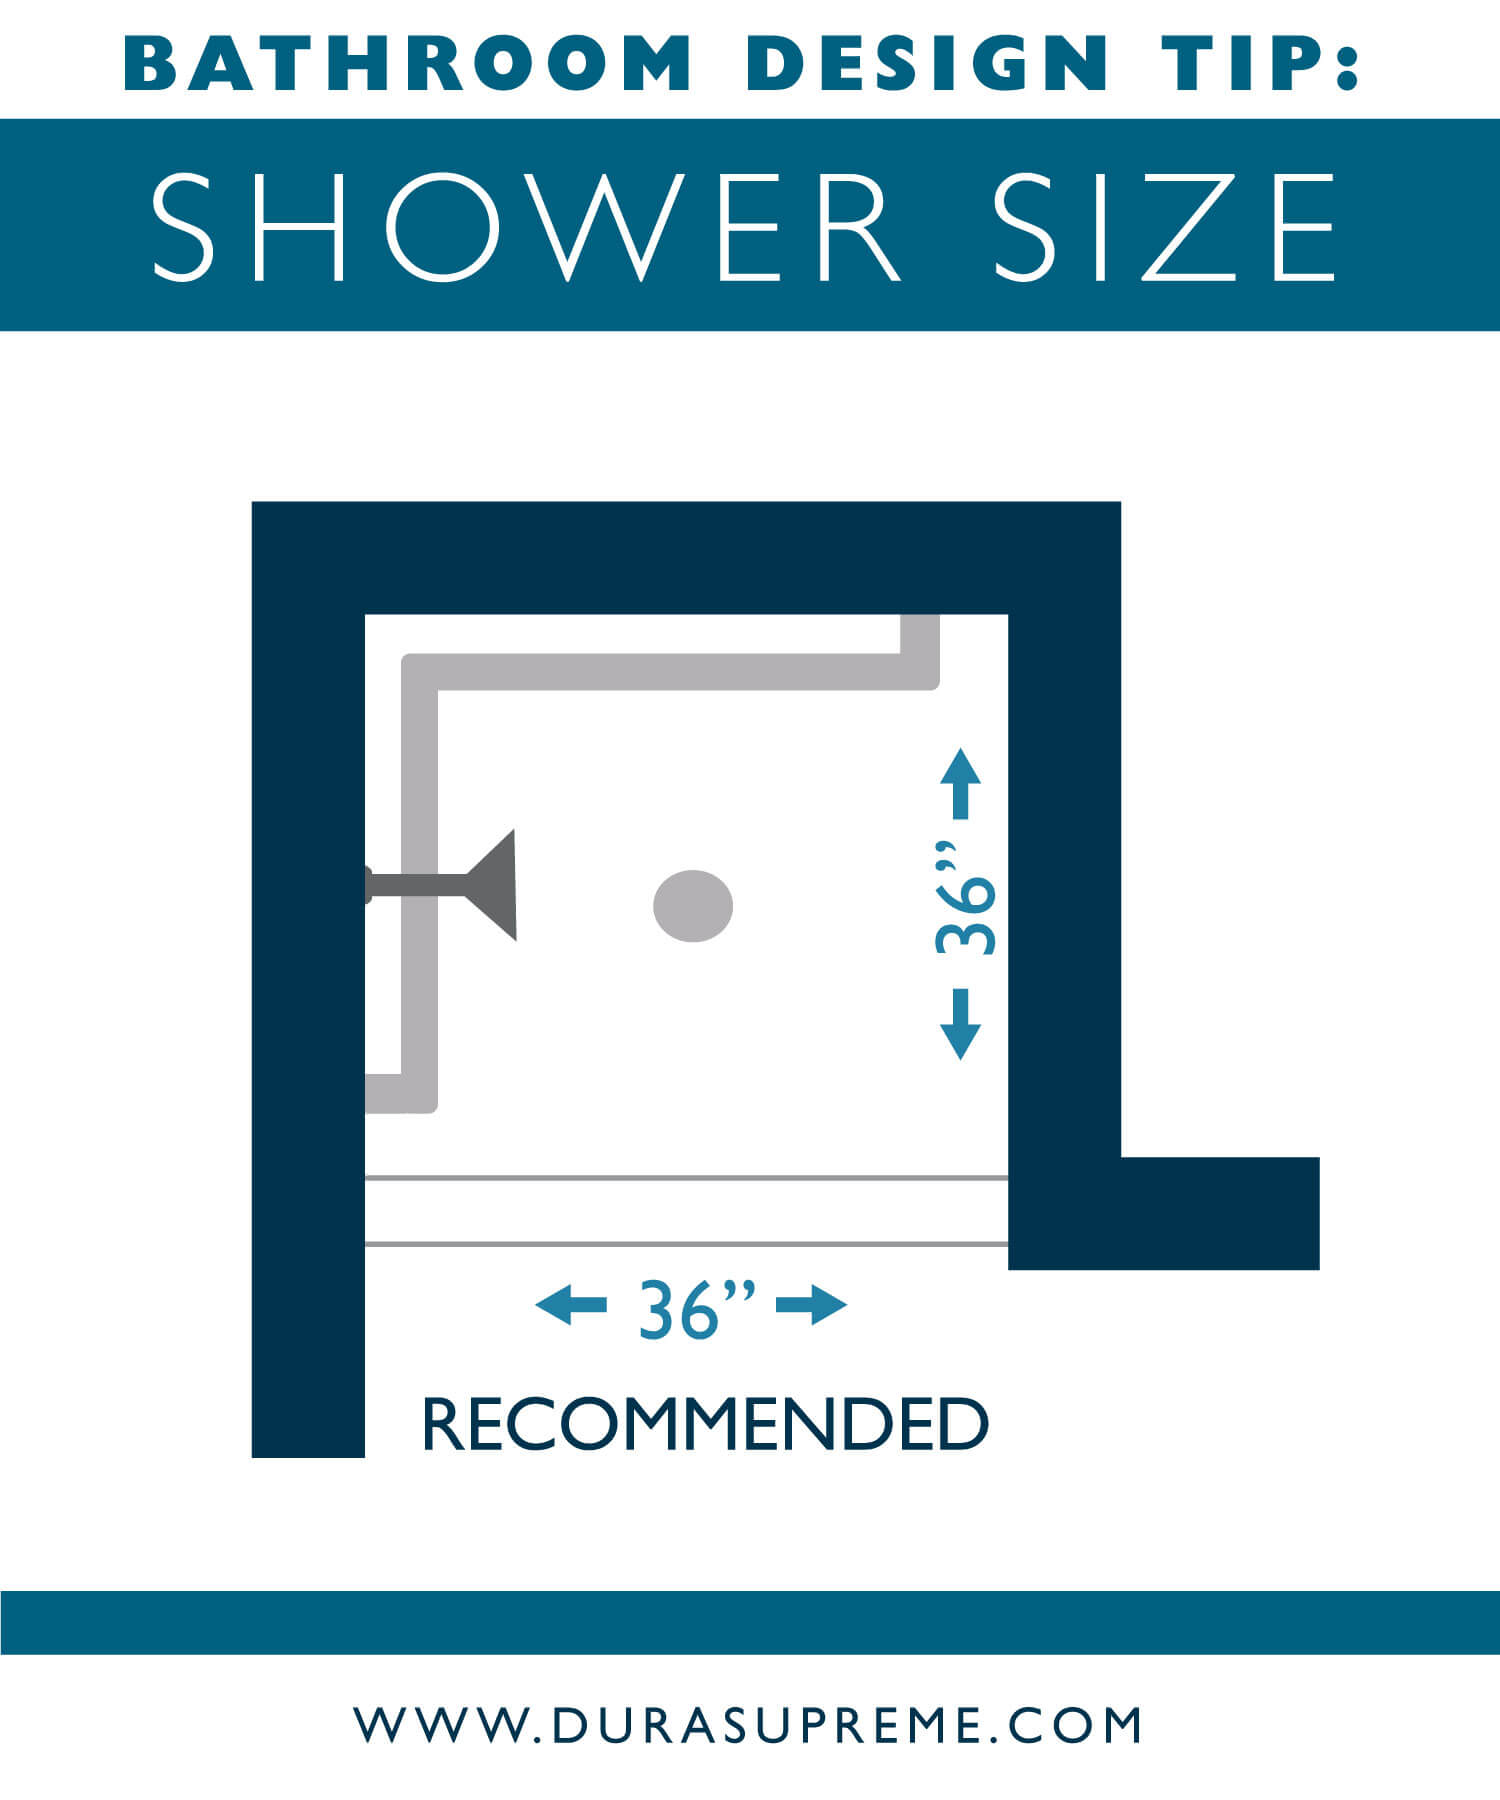 Bathroom Design Tips and Guidelines: Shower Size Rules